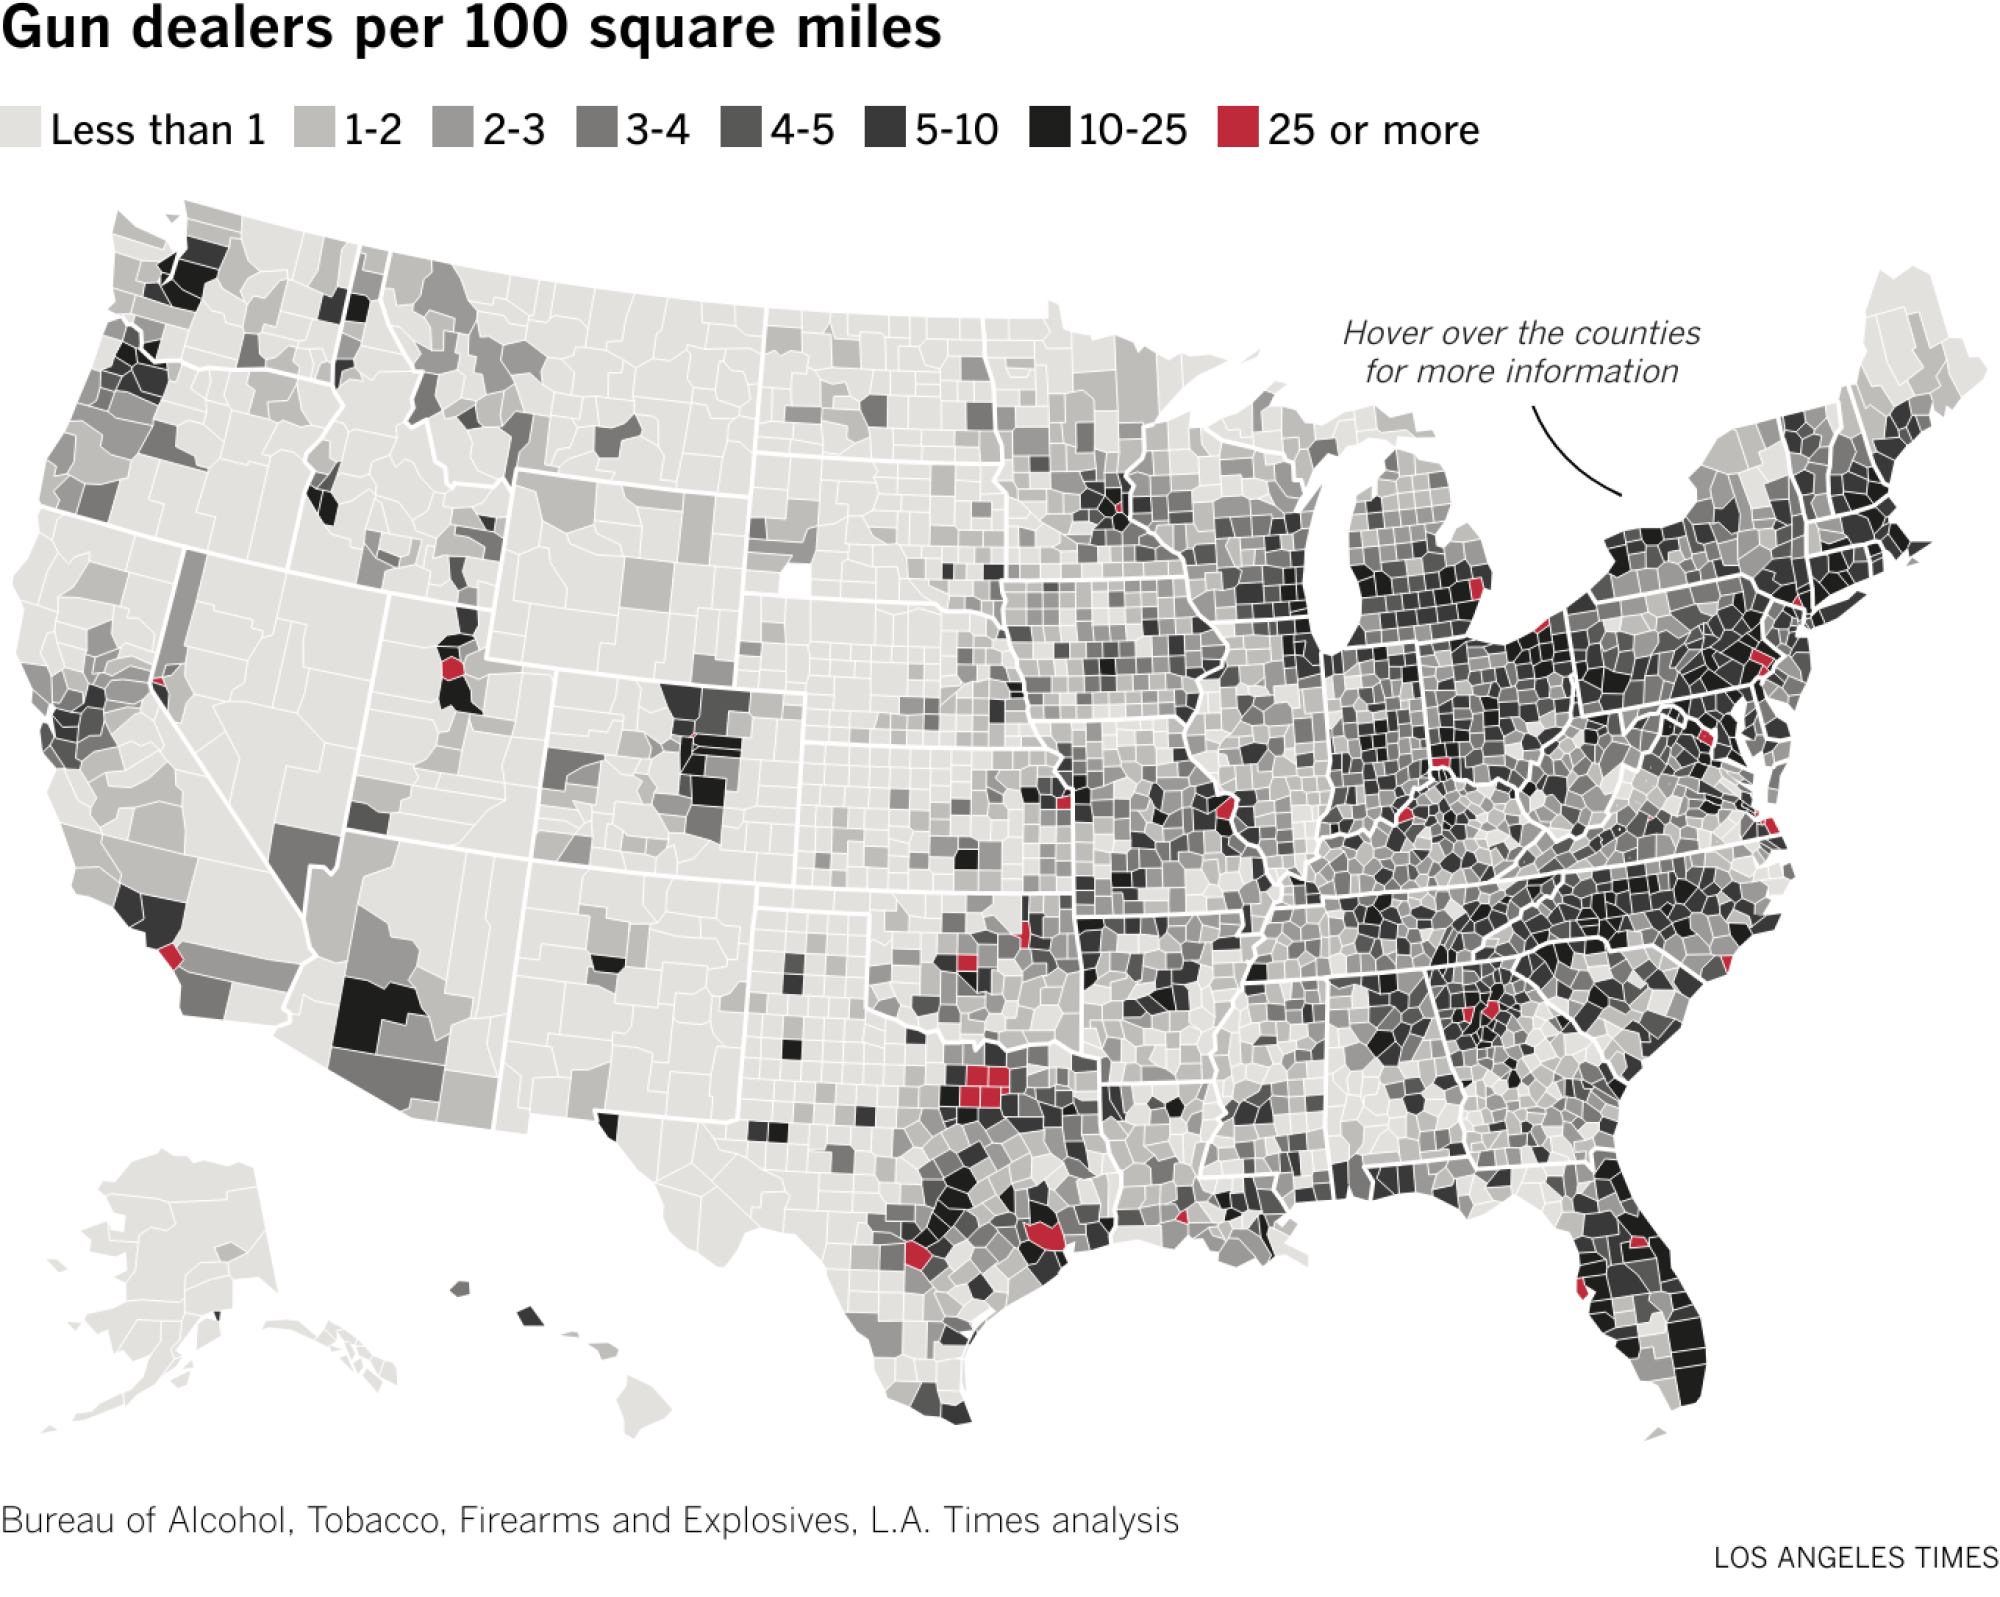 County-level color coded map of gun dealer density in the United States. Counties containing Dallas, Phoenix, Salt Lake City and Anaheim among the highest with 25 or more dealers per 100 square miles.